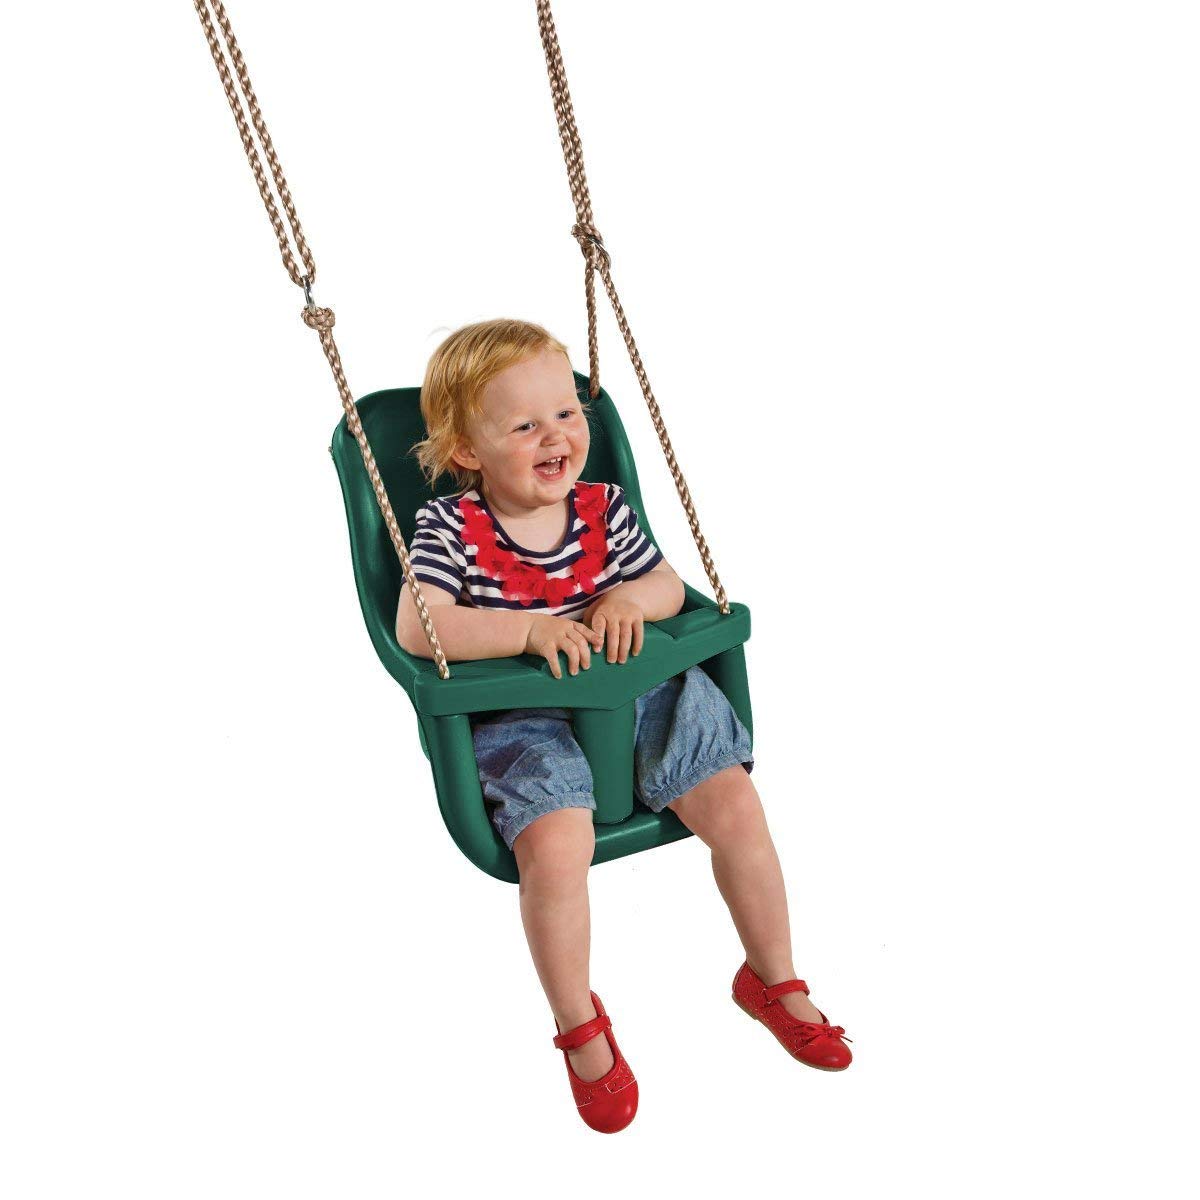 Baby swinging in a baby seat